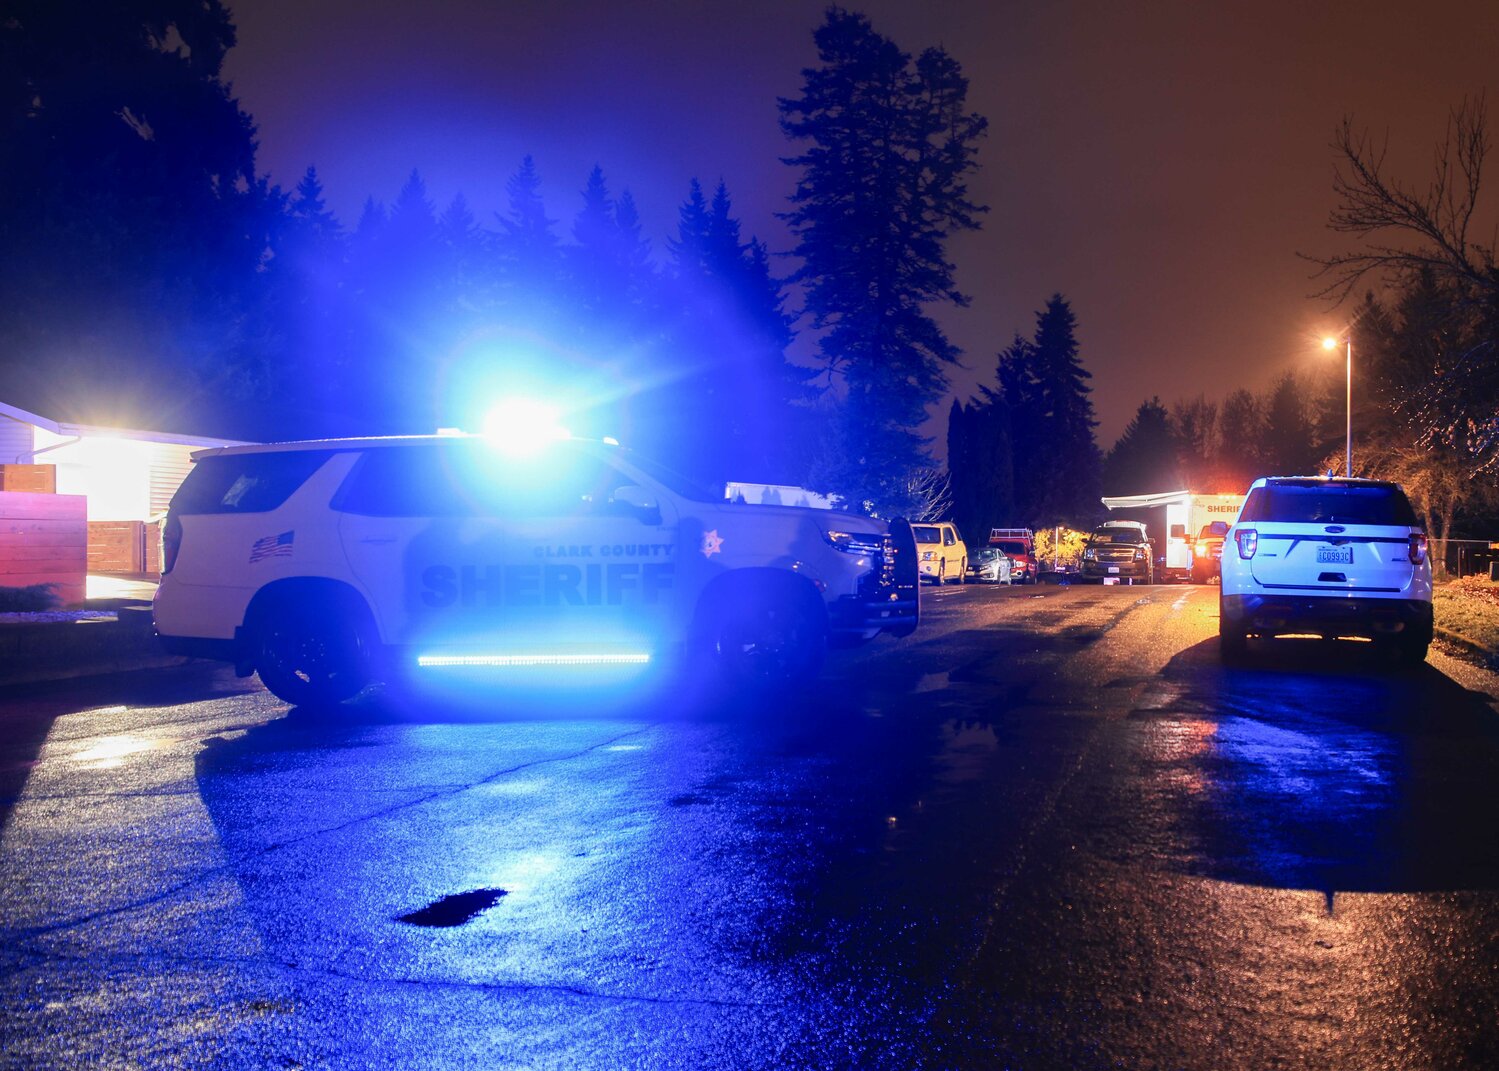 Clark County Sheriff's Office investigators were still actively investigating the scene of an apparent murder-suicide with five deceased in Orchards at 10:27 p.m. on Sunday, Dec. 3.